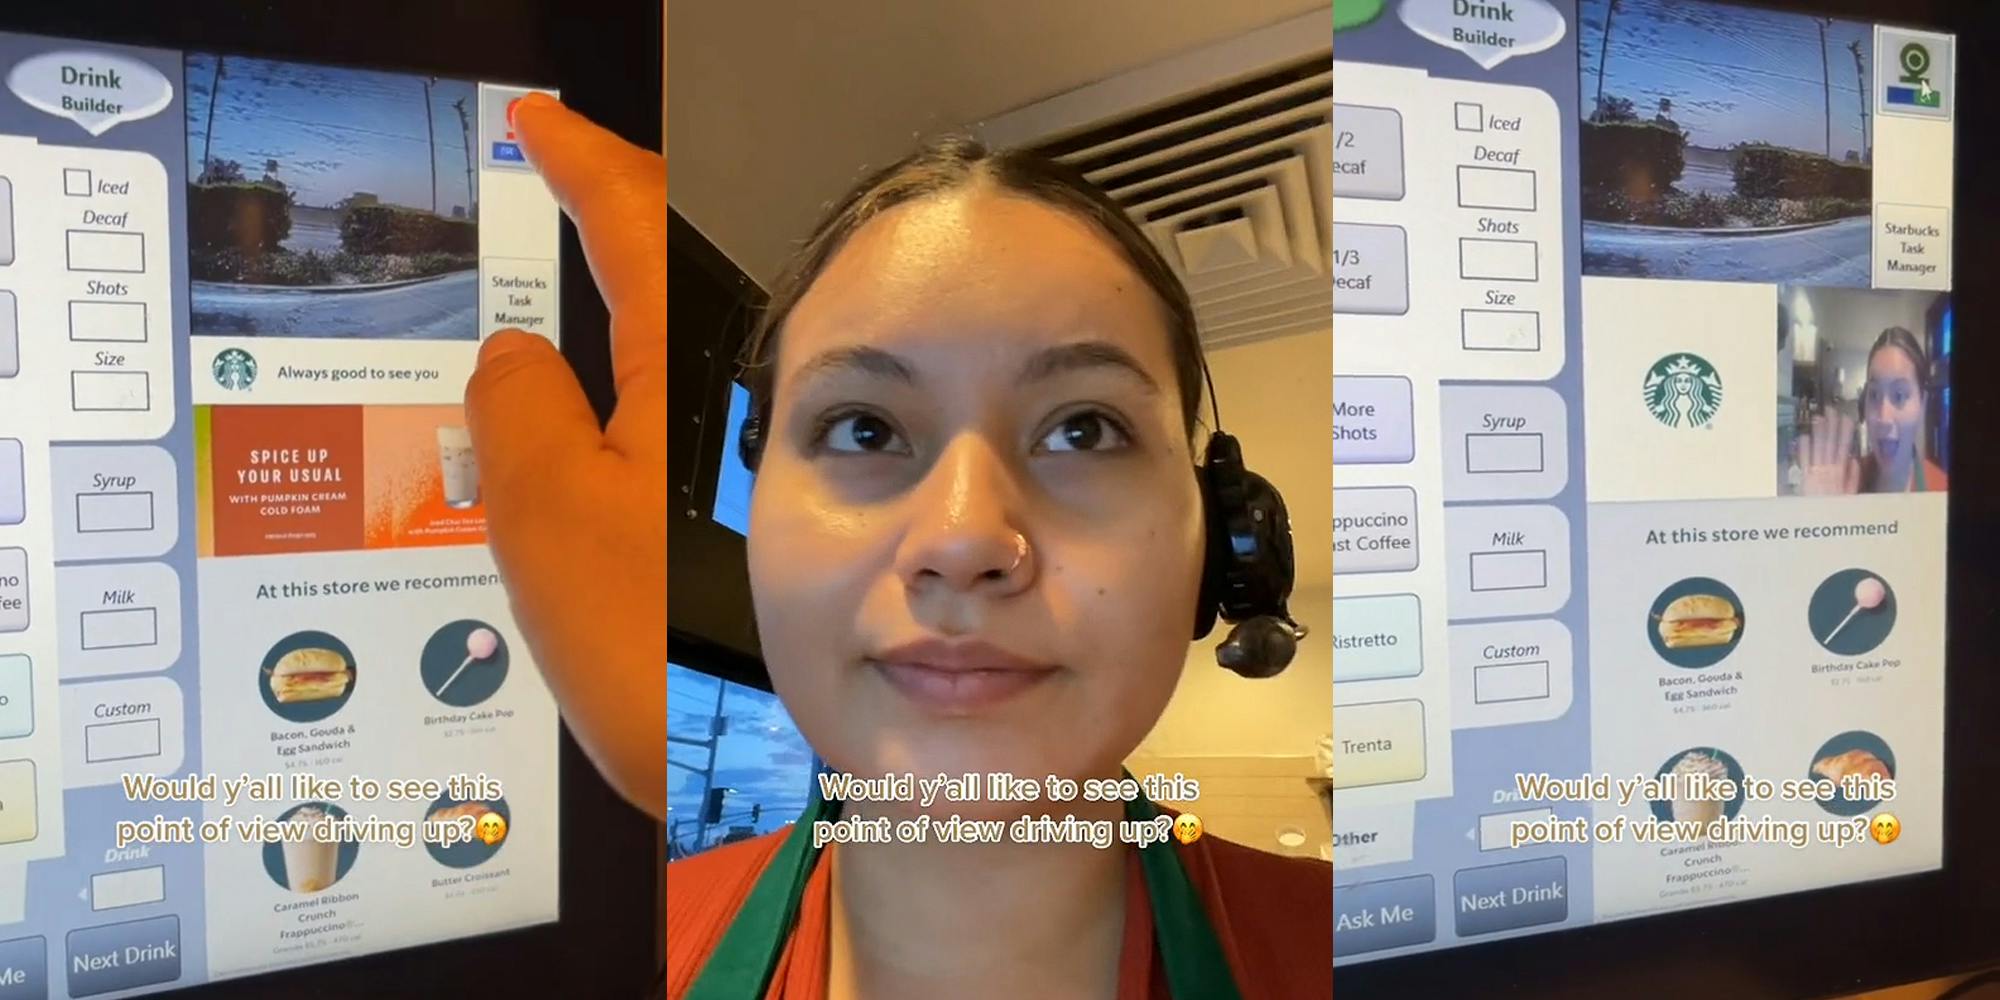 Starbucks touch screen order system for drive thru with worker pressing camera button caption "Would y'all like to see this point of view driving up?" (l) Starbucks worker with headset on caption "Would y'all like to see this point of view driving up?" (c) Starbucks touch screen order system for drive thru with worker waving in camera caption "Would y'all like to see this point of view driving up?" (r)